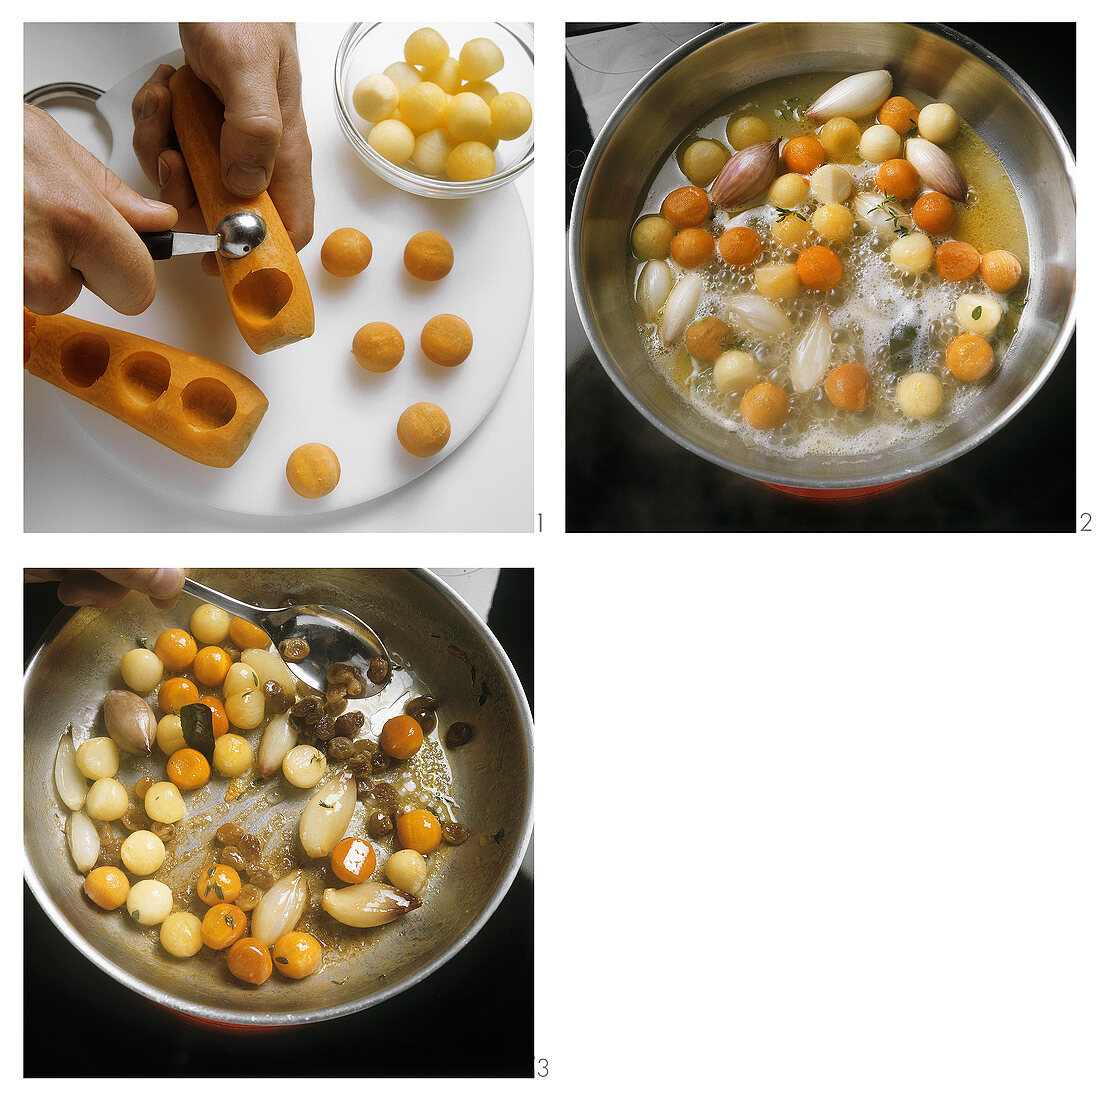 Cutting out and sweating vegetable balls